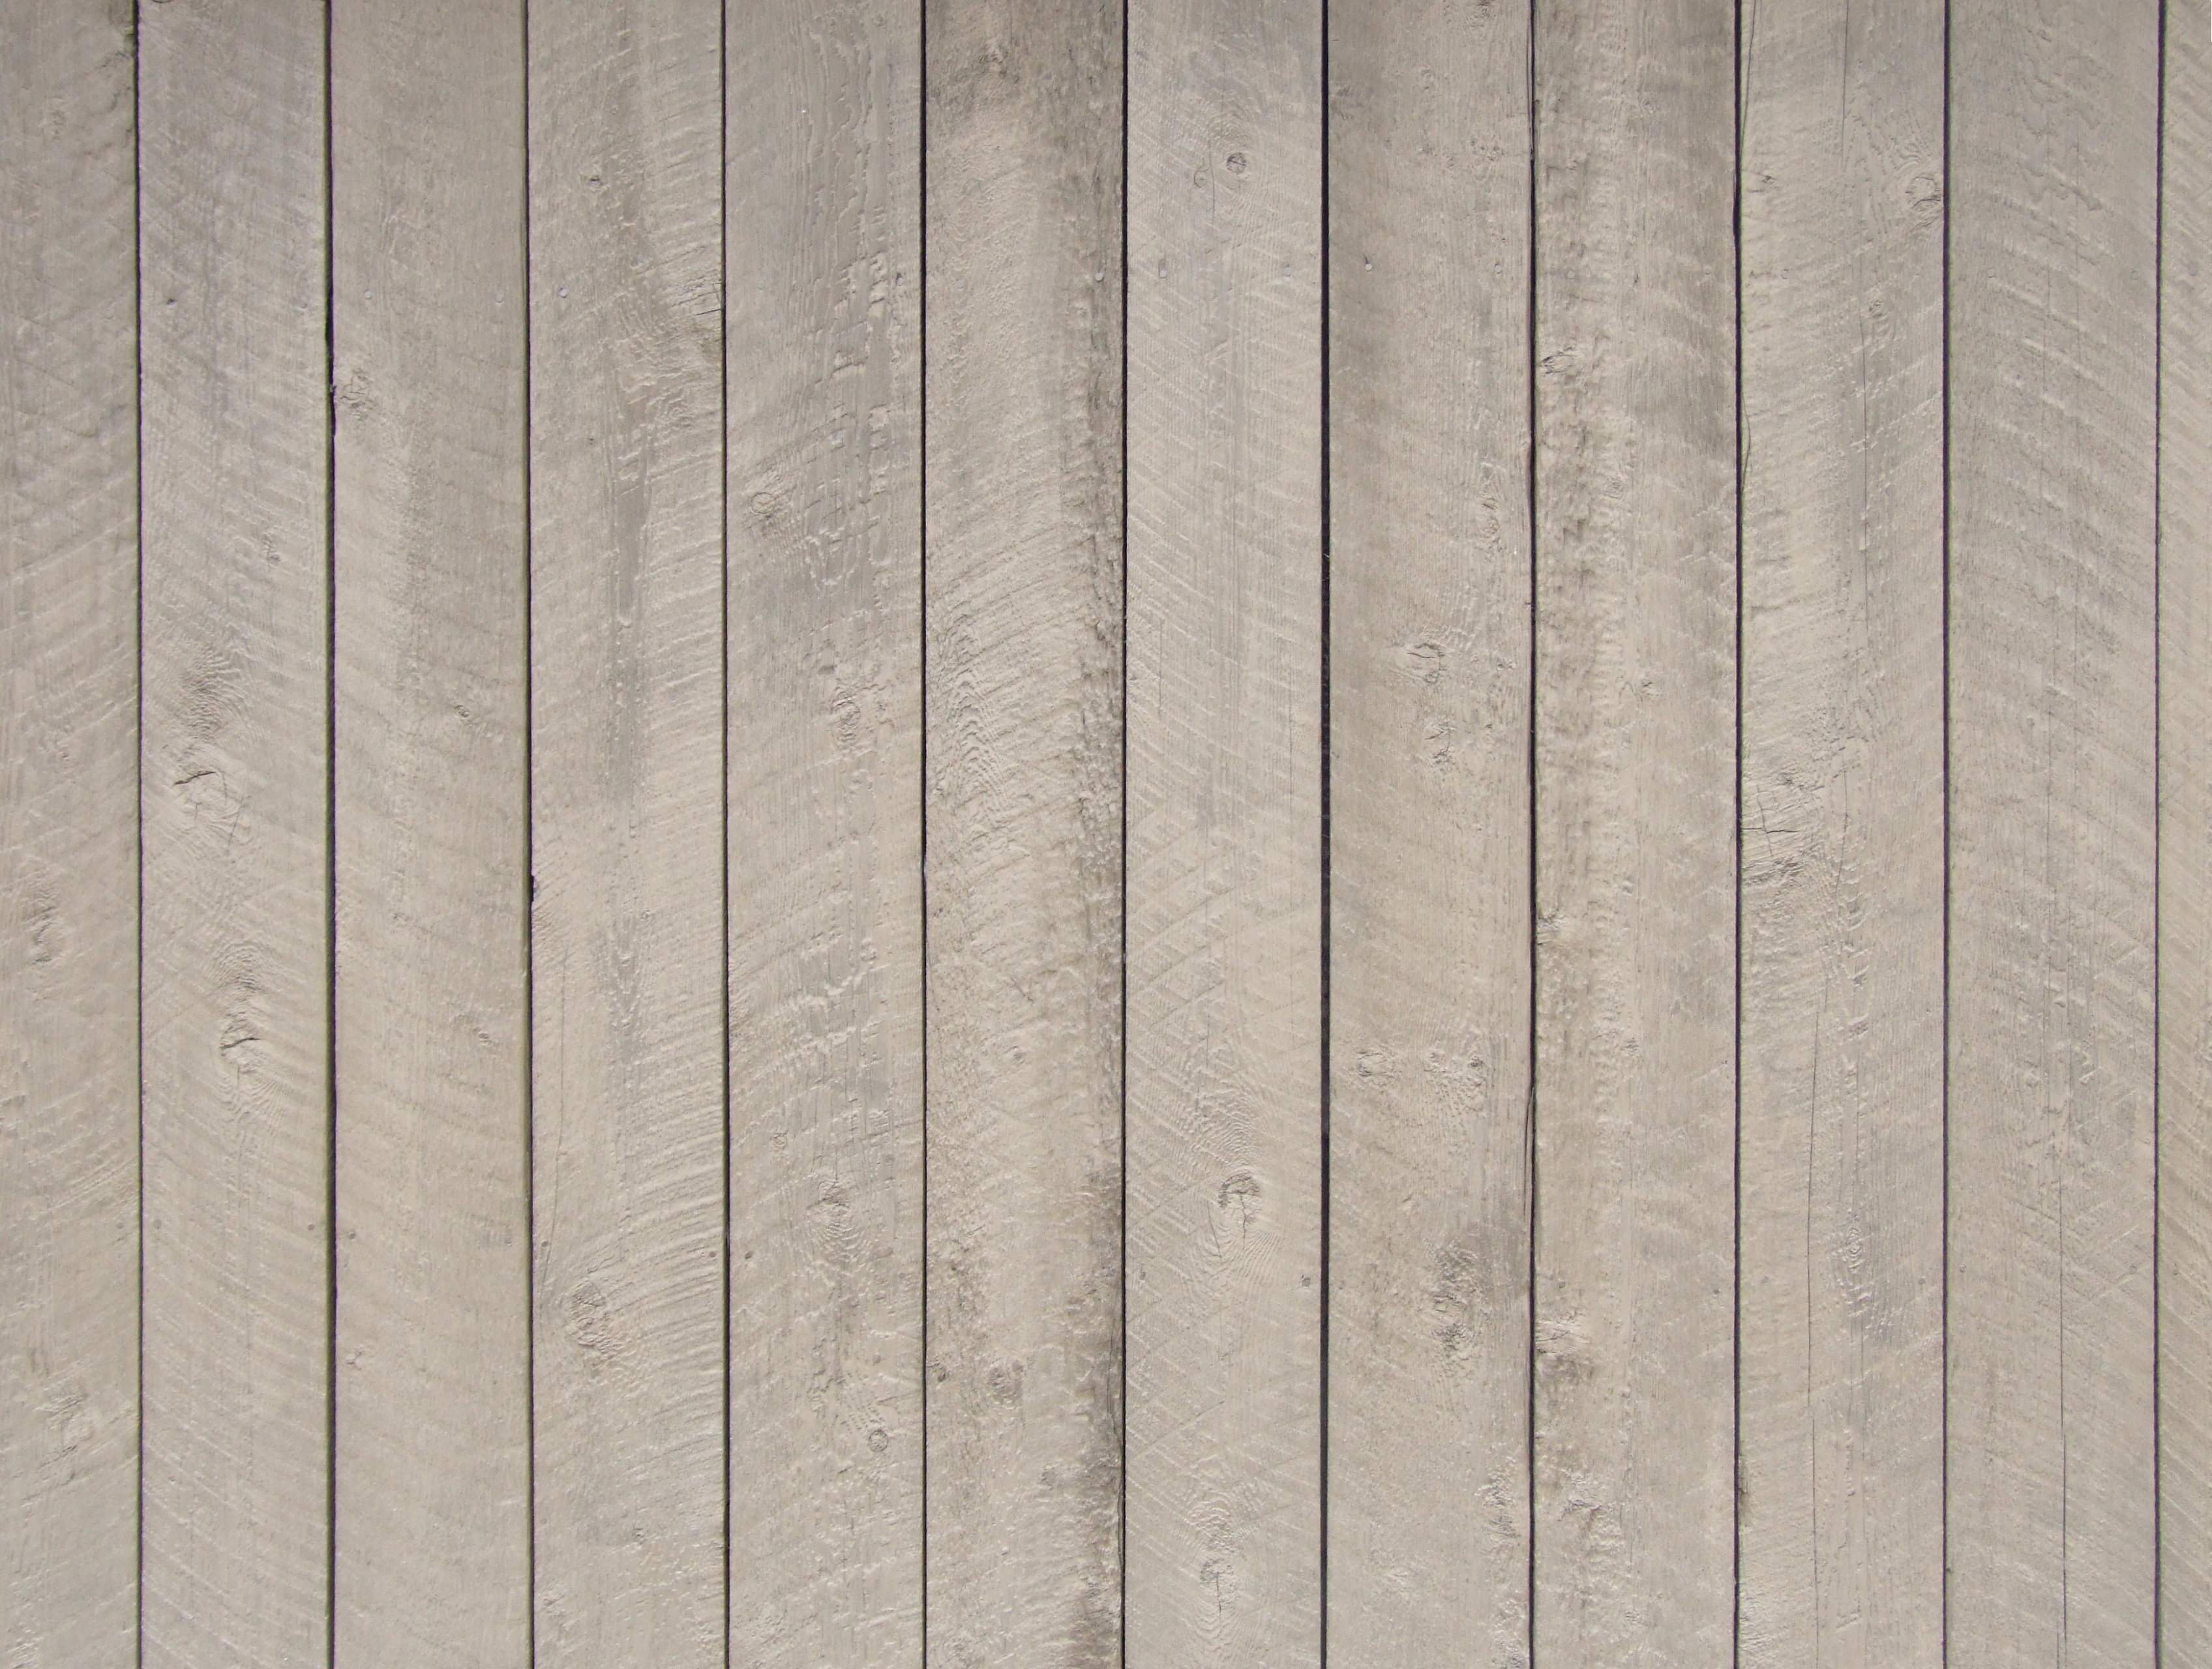 Wooden Boards Texture Background Wood